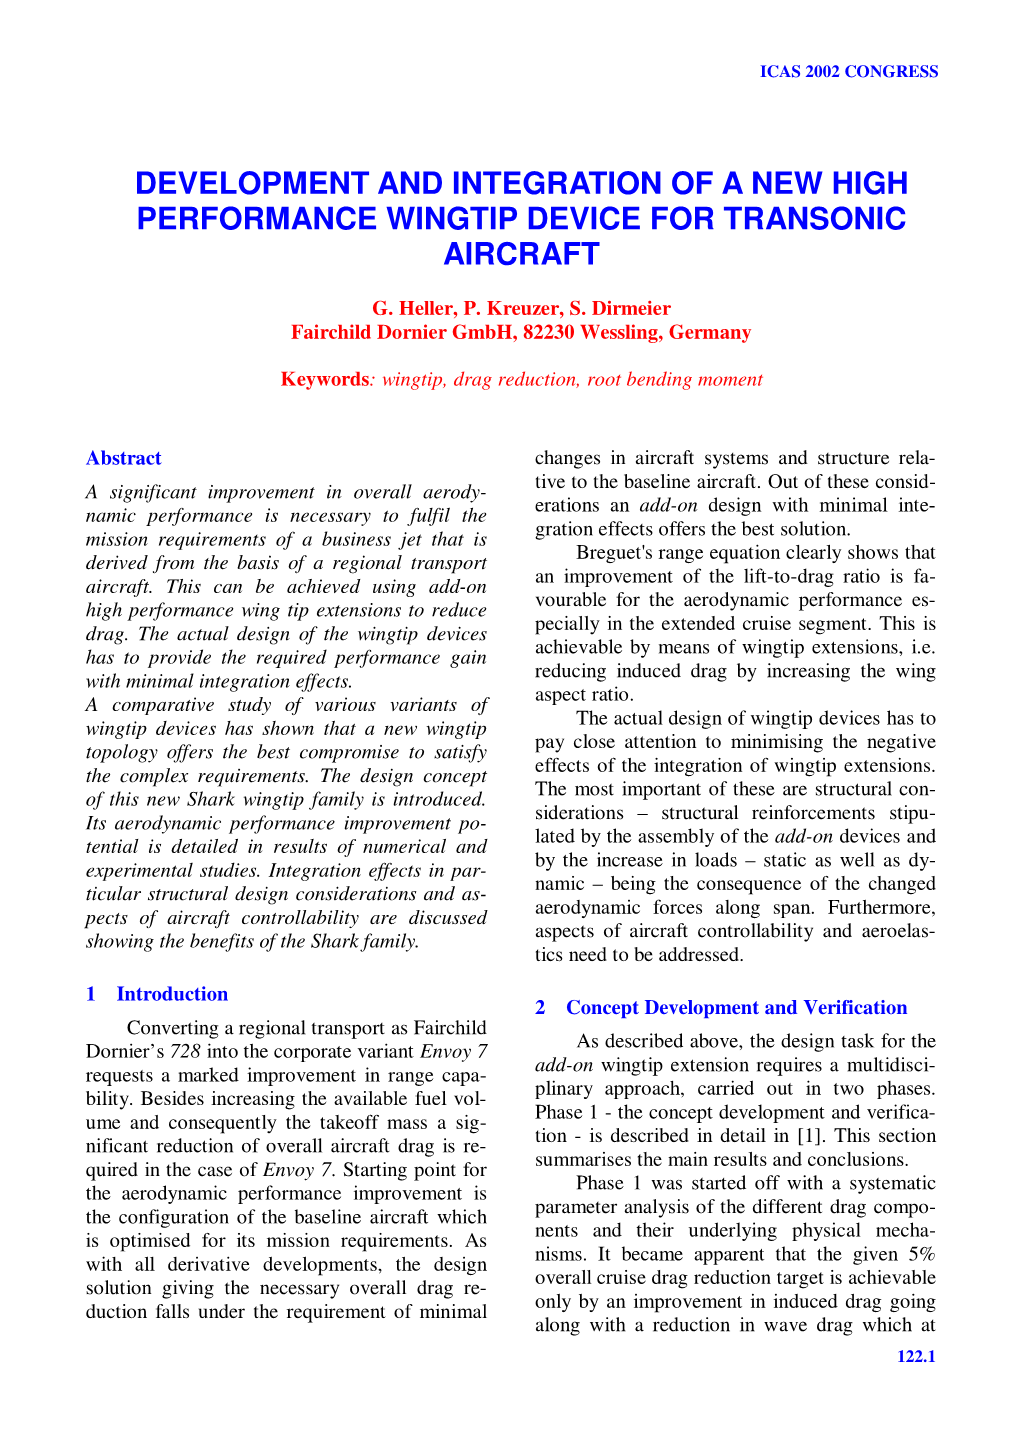 Development and Integration of a New High Performance Wingtip Device for Transonic Aircraft